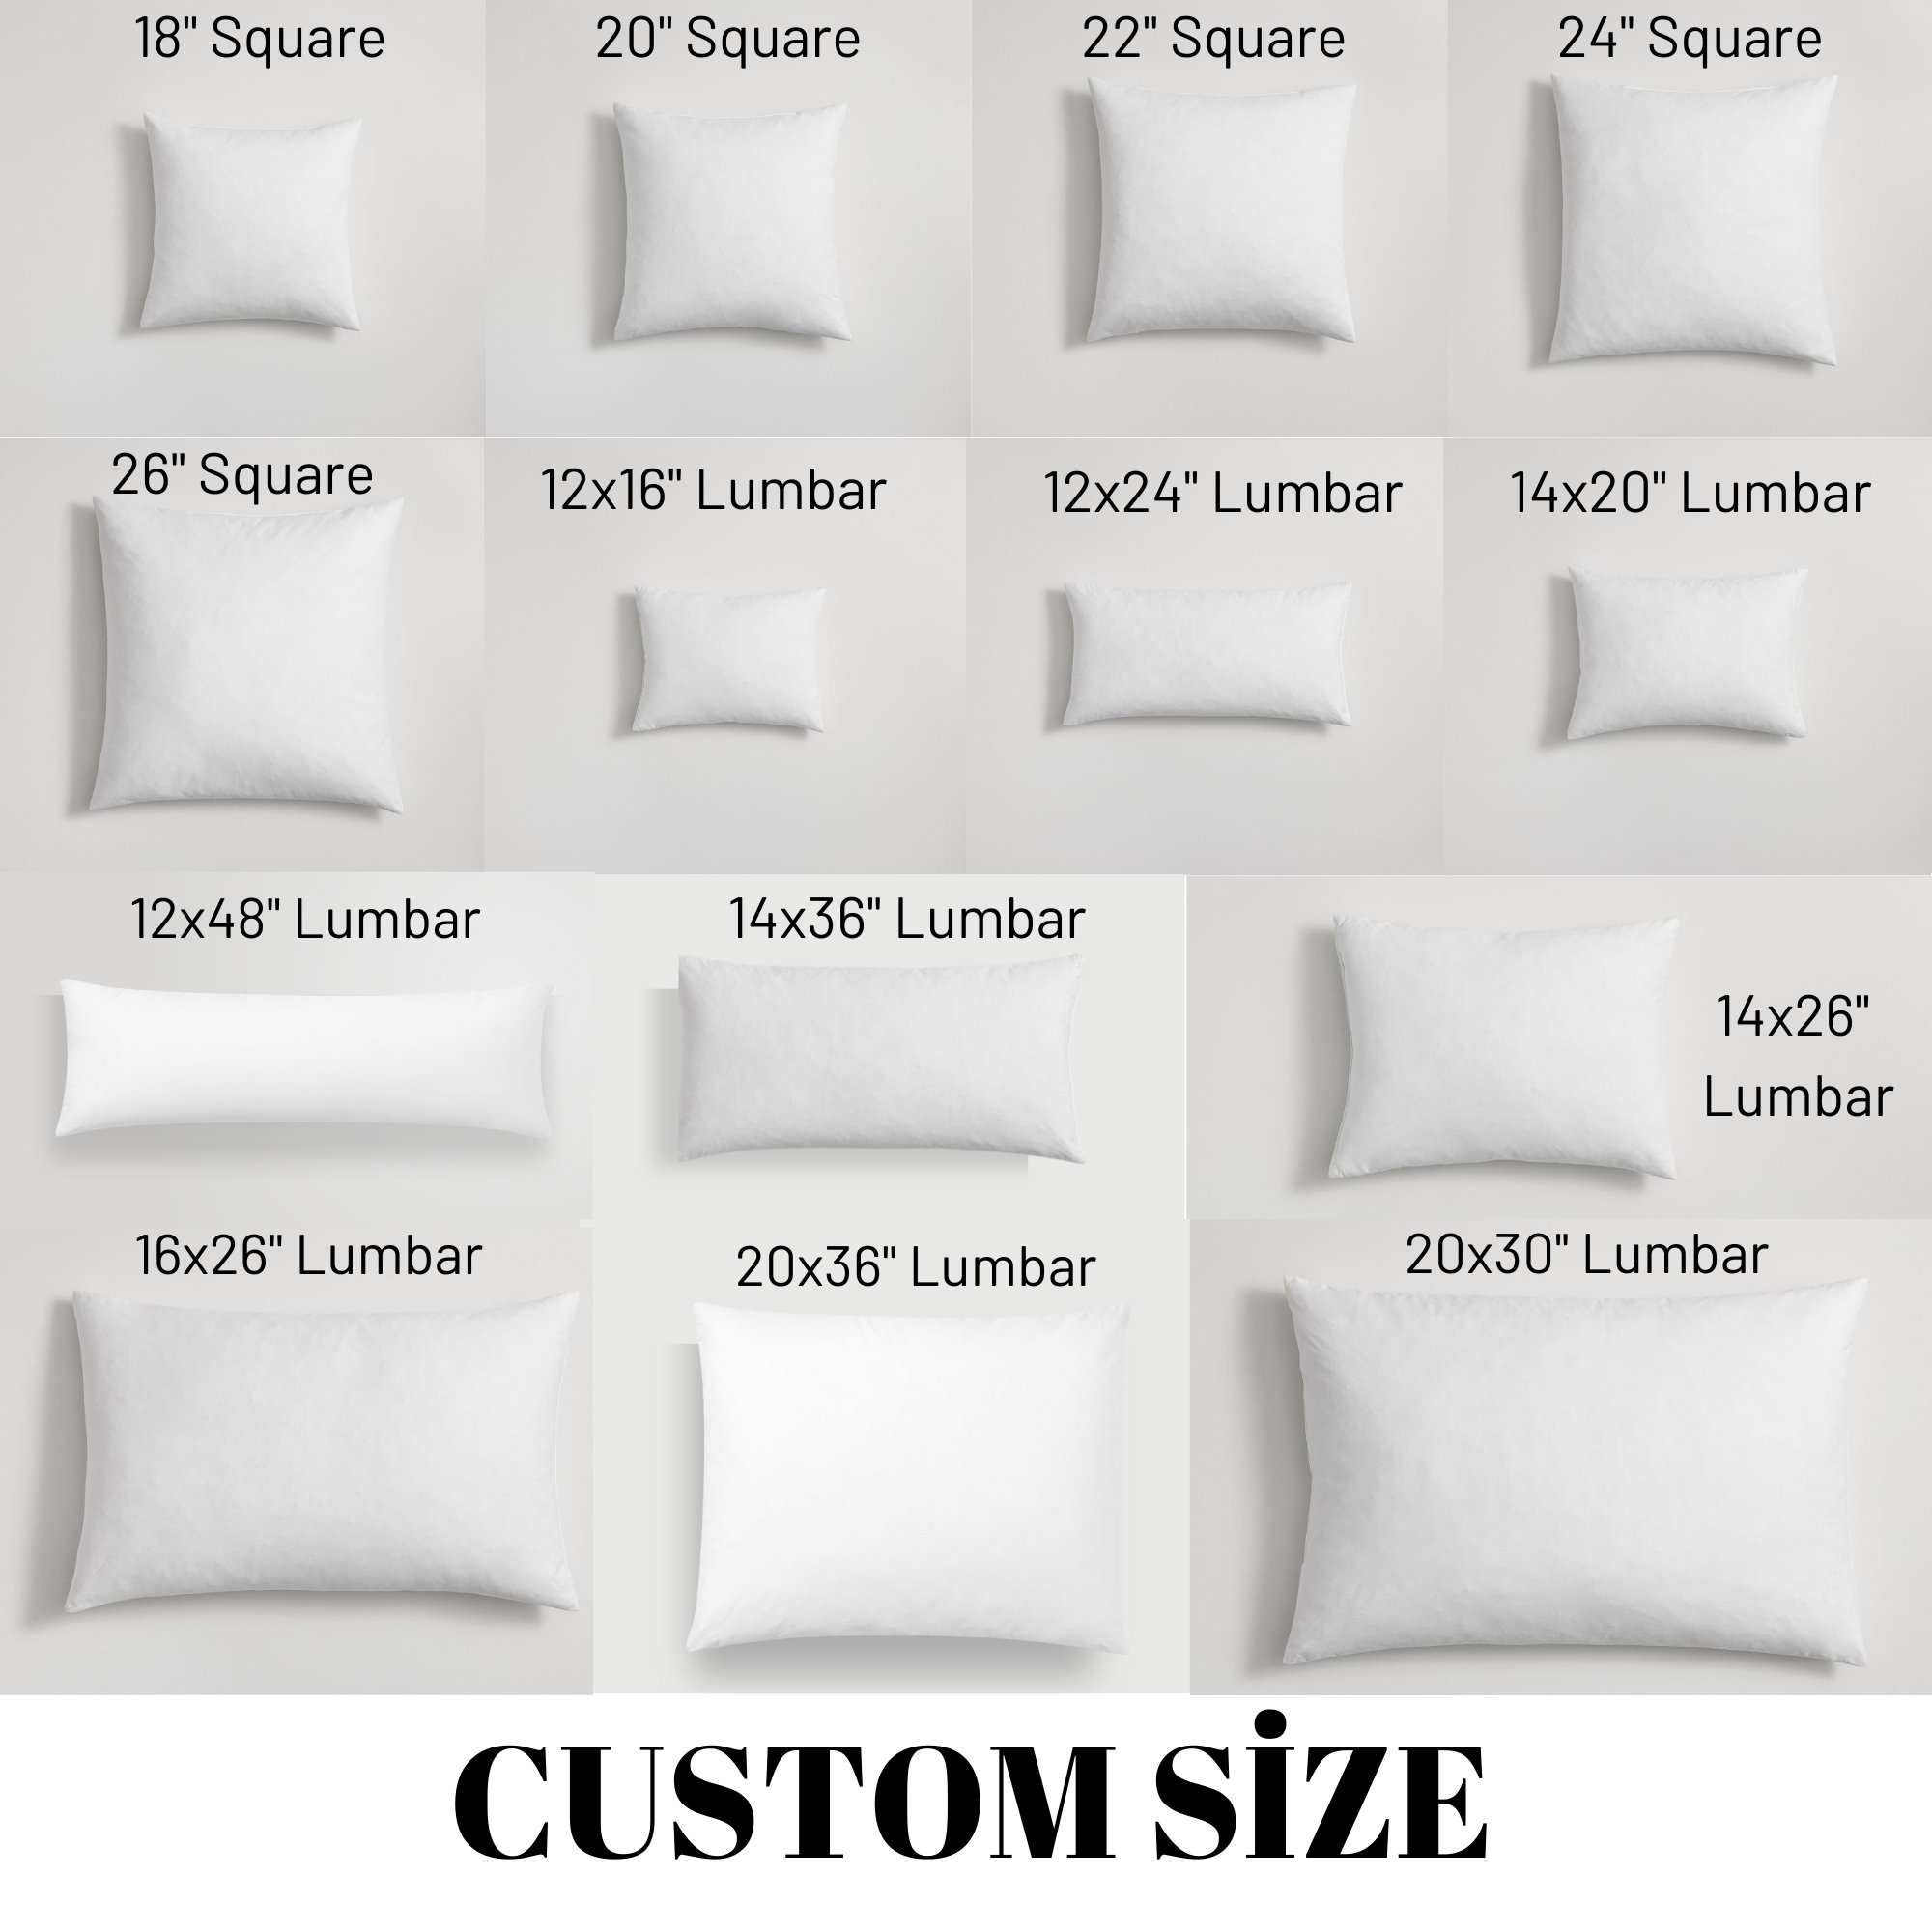 Pillow Insert, 16x16, 12x20, 12x24, 12x36, 16x24, 26x26, 8x47, 12x47, Pillow  Insert, Pillow Filling, Choose Your Size, Pillow Insert ONLY 